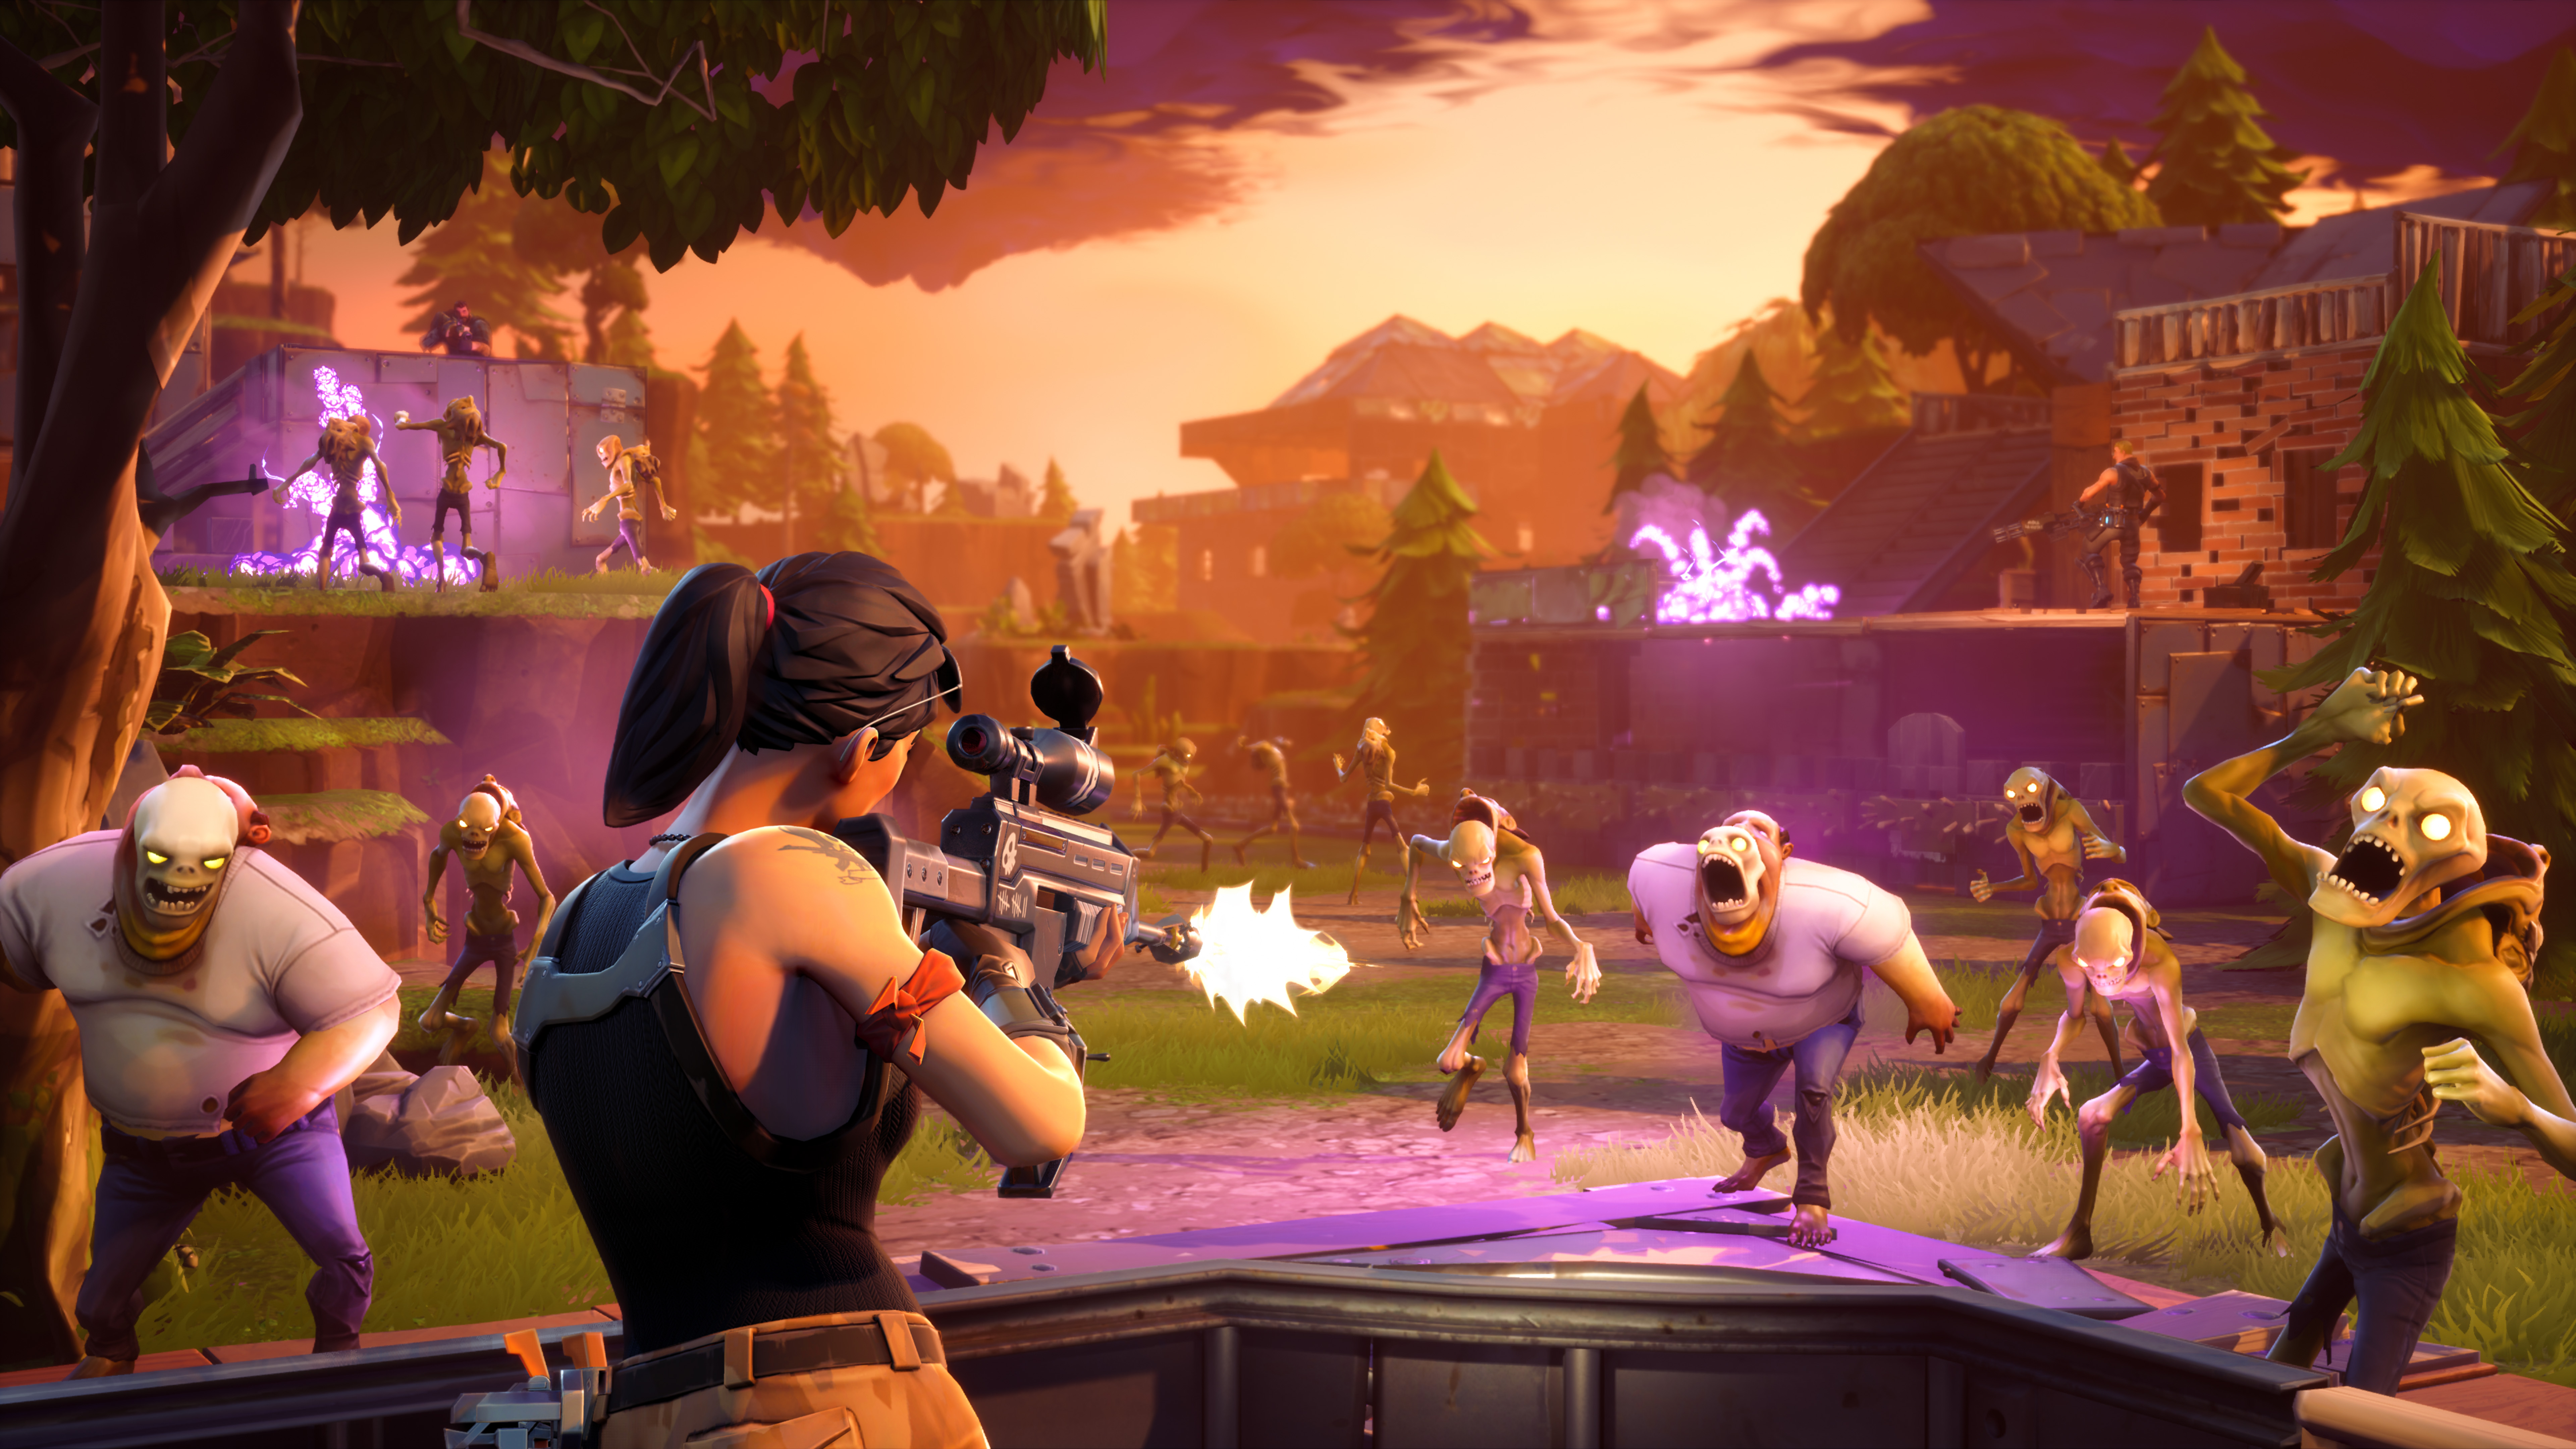 enlarge at its best fortnite looks and feels like this nicely staged promo pic of in game action however so many free to play annoyances drag this - fortnite end of early access